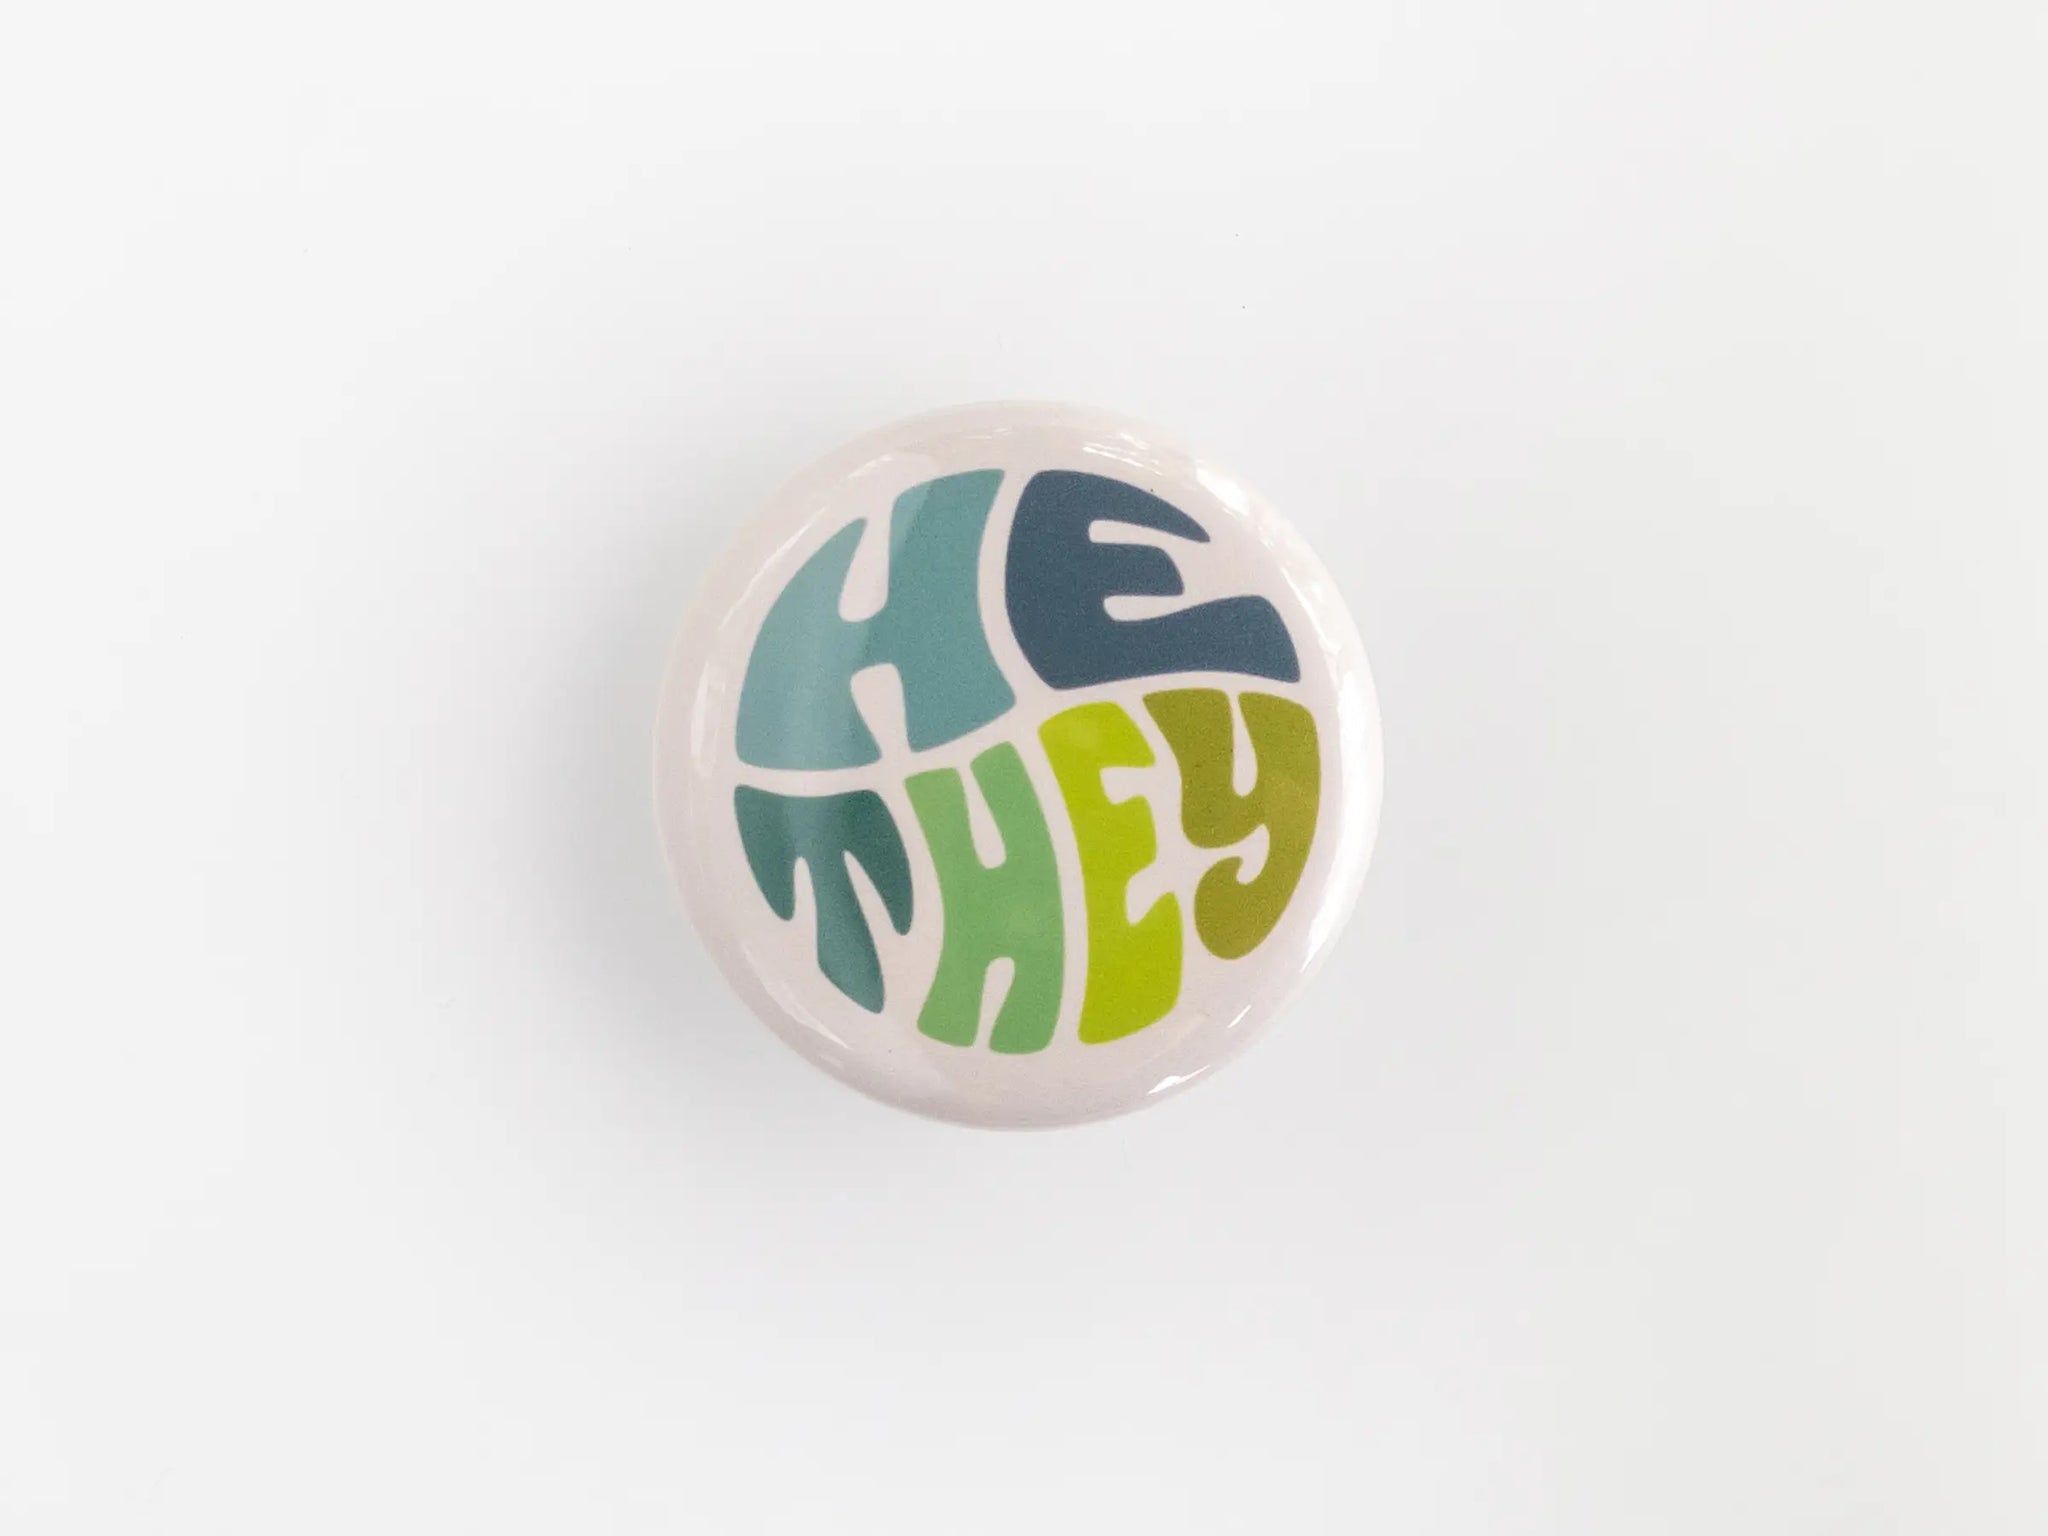 A 1.25” button with the pronouns “he” and “they” in multicolored lettering